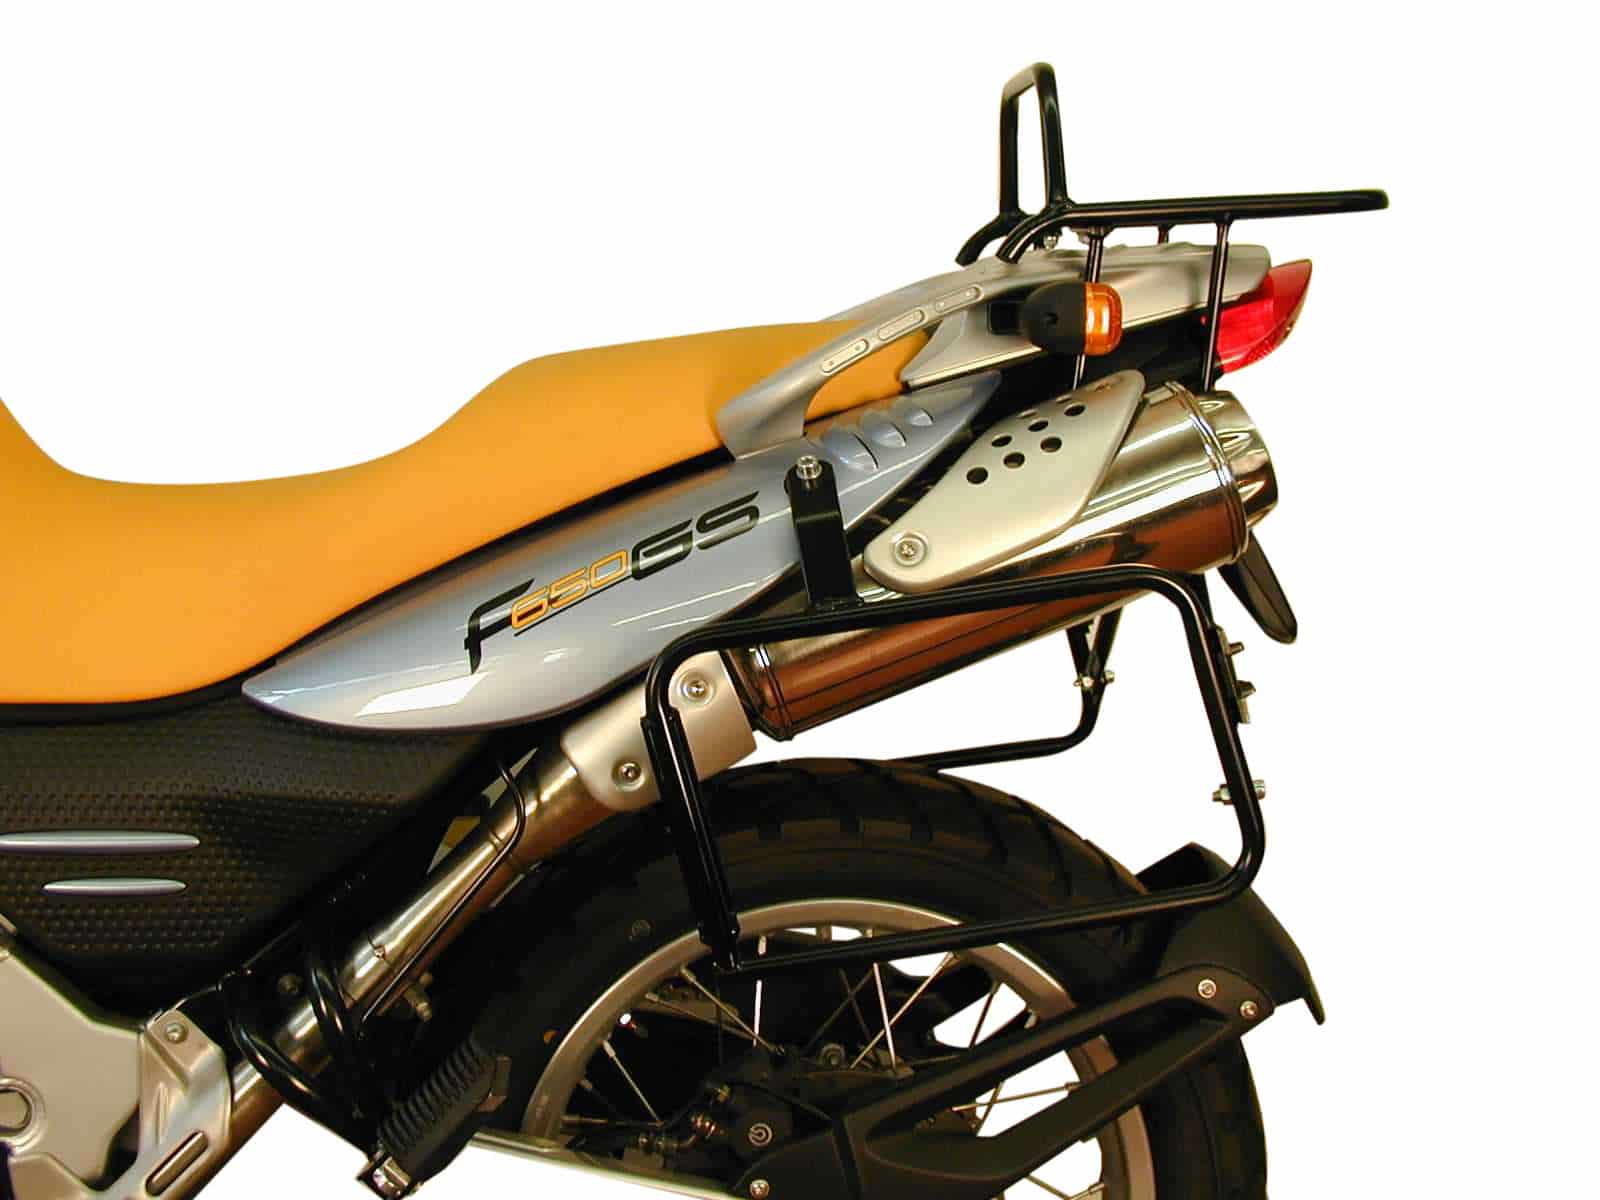 Sidecarrier permanent mounted silver for BMW F 650 GS Dakar (2004-2007)/F 650 GS/G 650 GS (single cylinder)